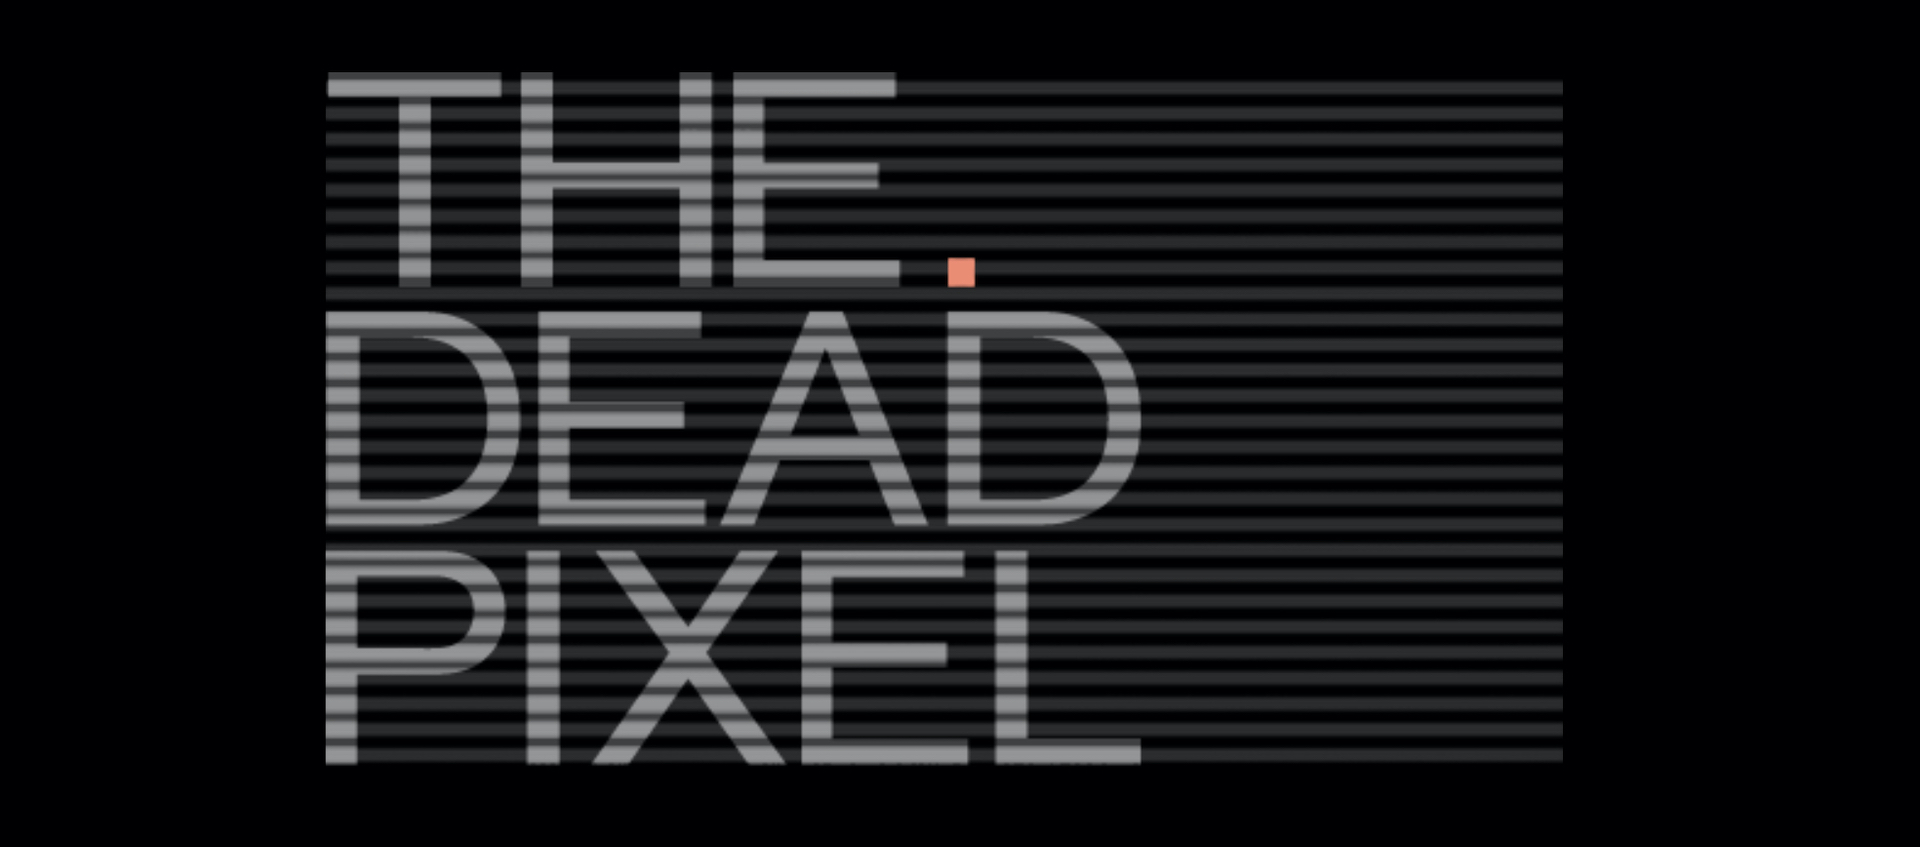 Gray logo for The Dead Pixel podcast on black background